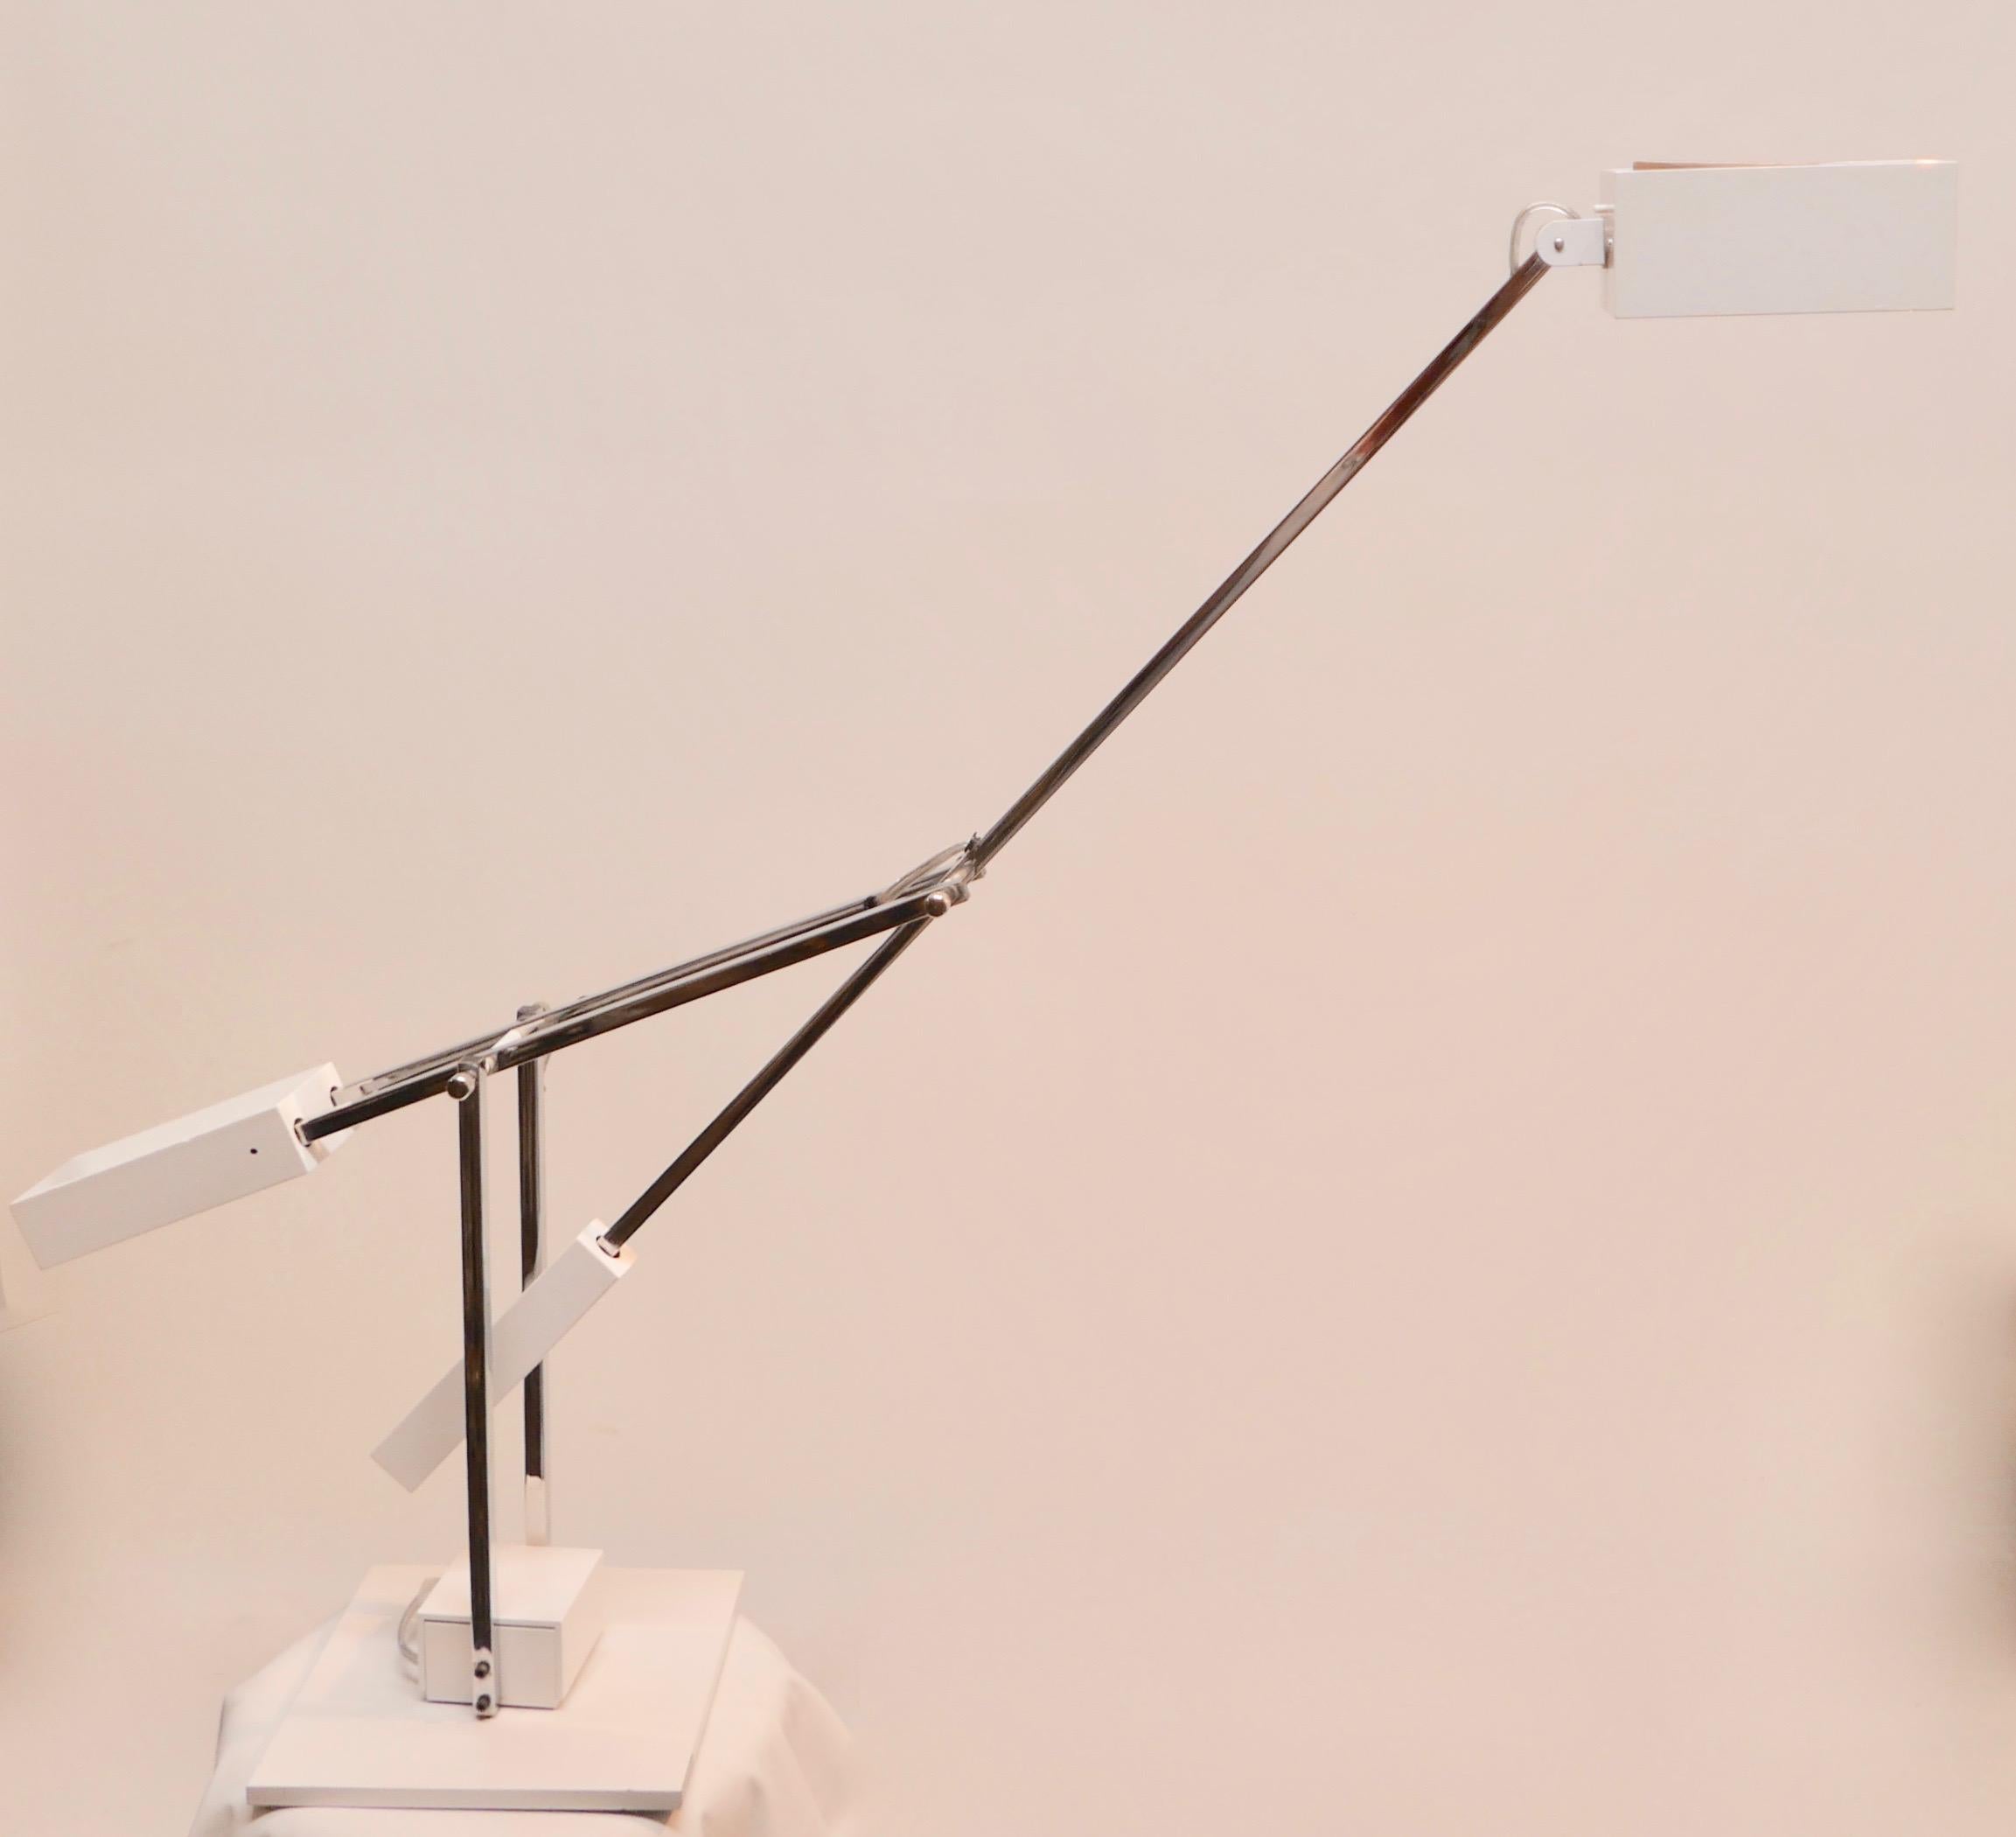 A beautiful Mid-Century Modern / Minimalist articulating chrome & white metal desk lamp designed by Robert Sonneman. The counter balanced light, controlled by a dimmer switch at the base, also swivels and turns and is attached to a second counter